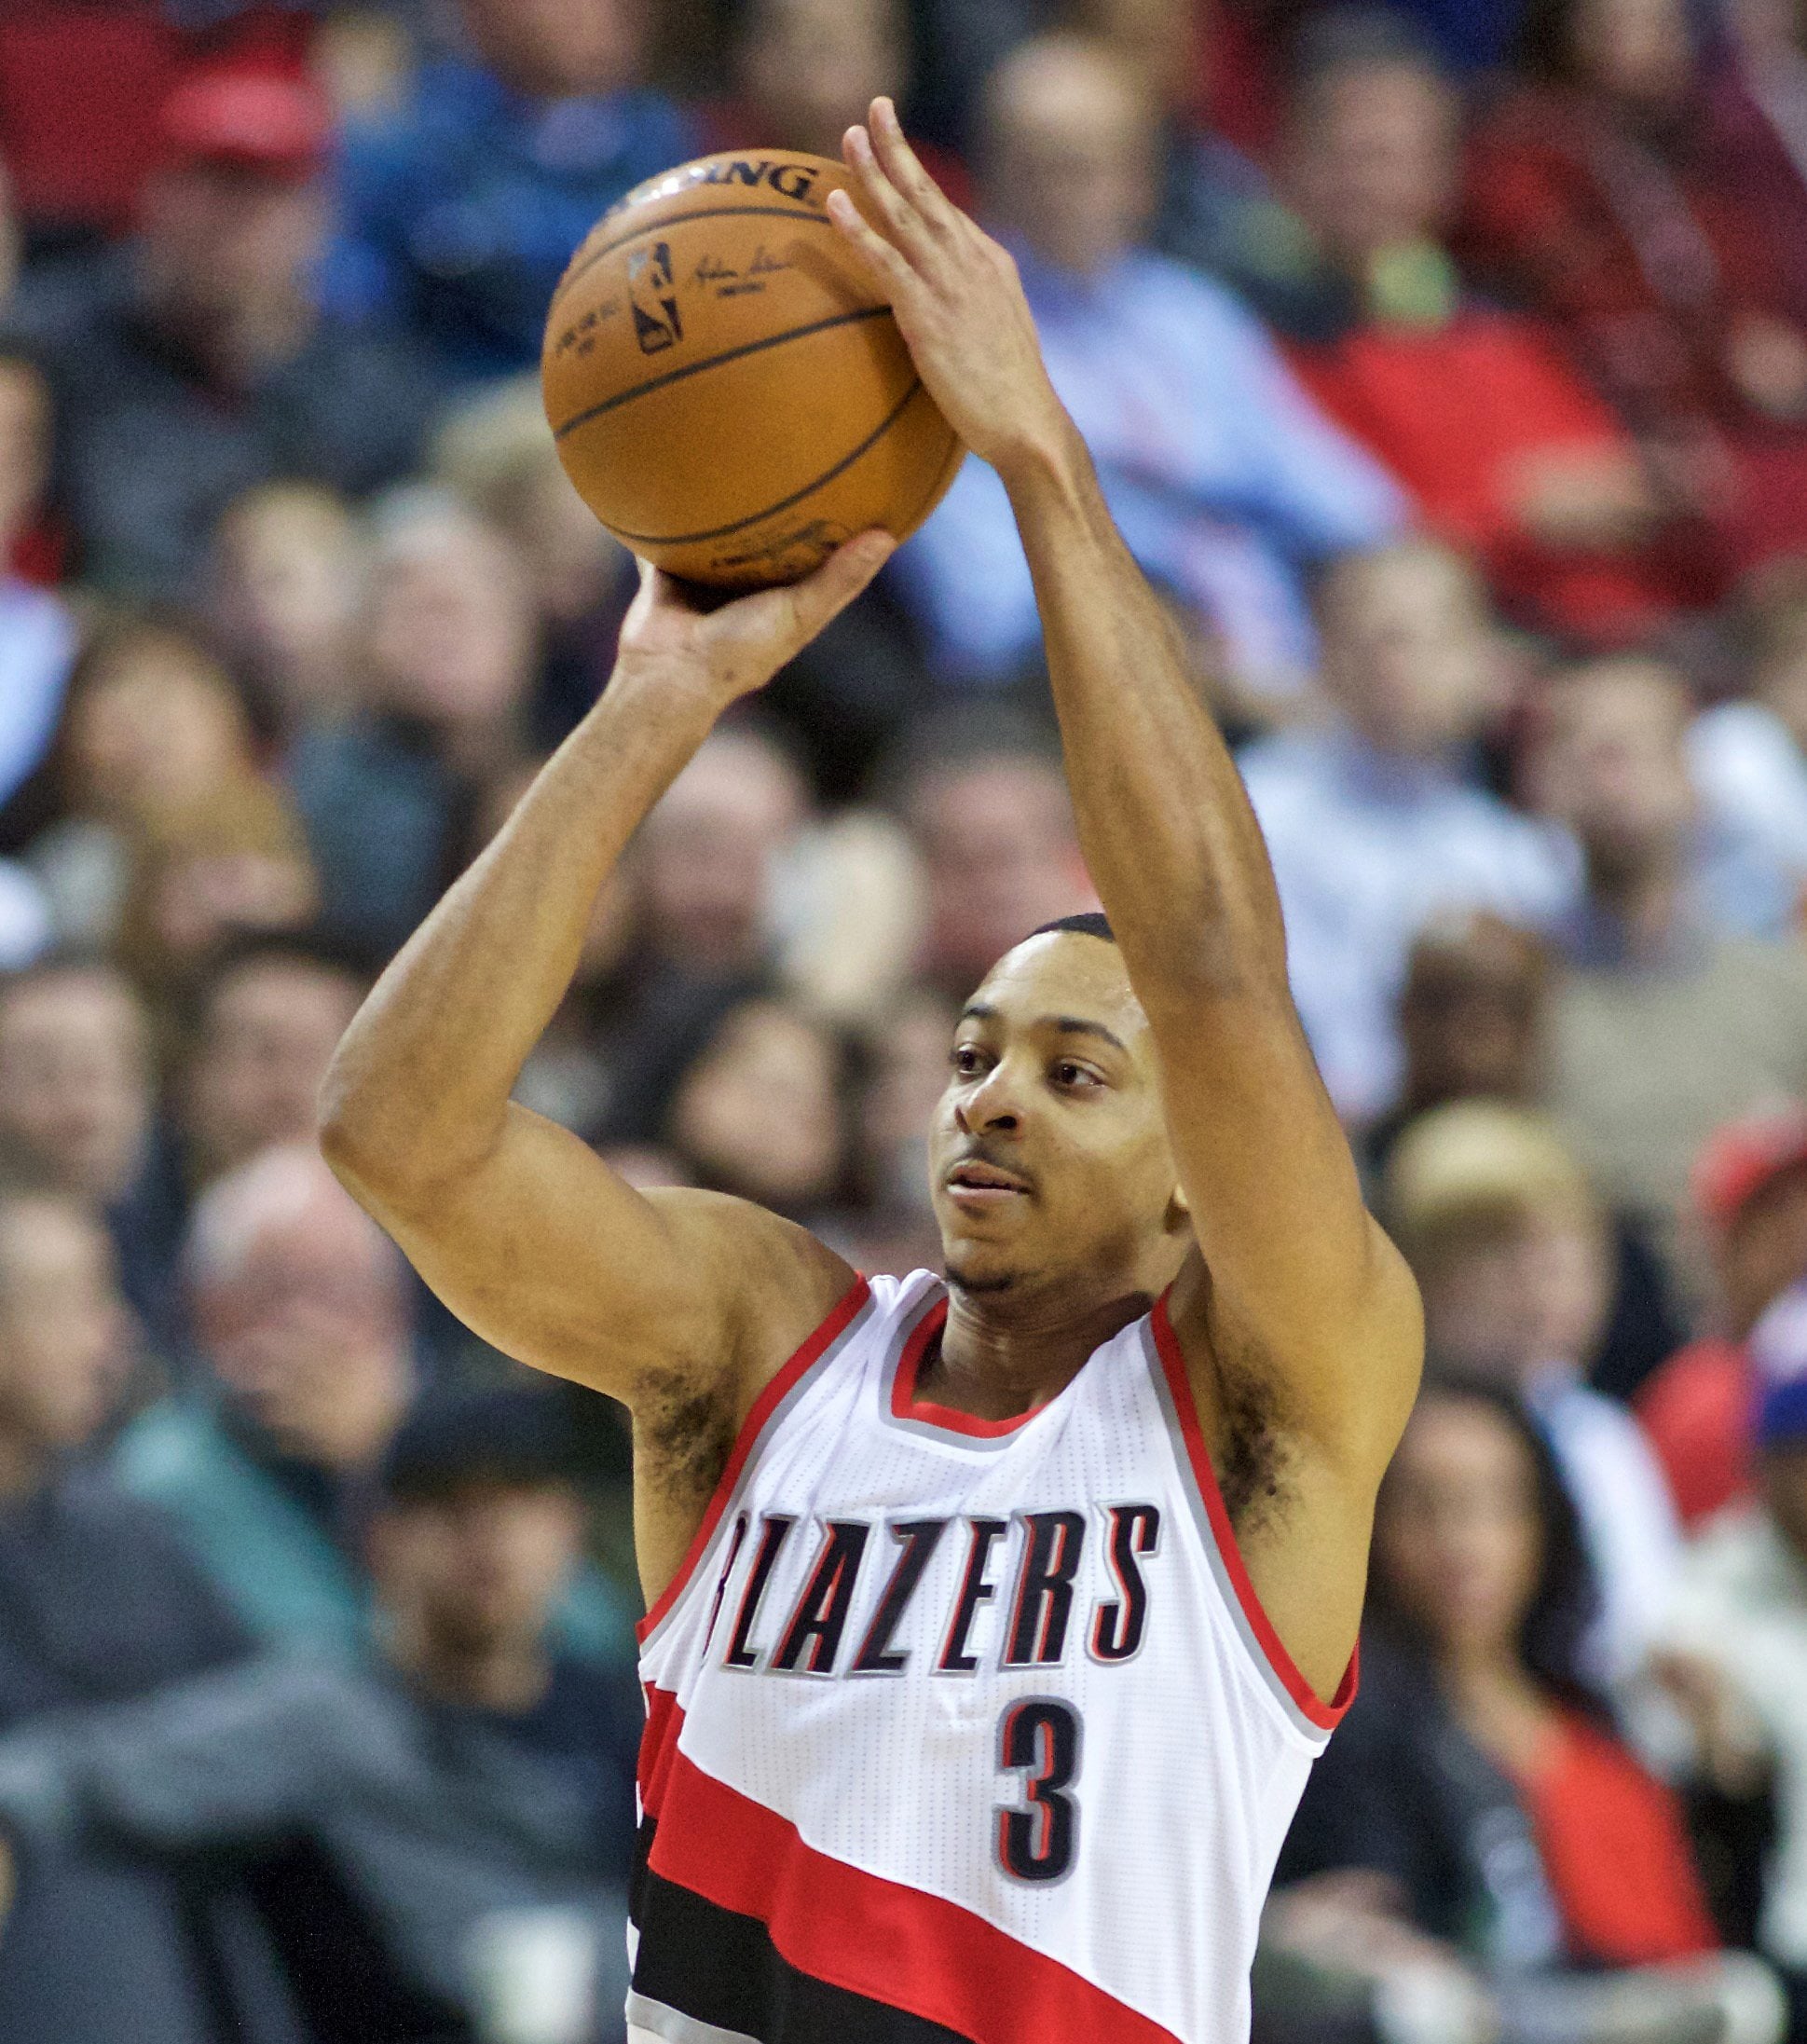 Portland Trail Blazers guard C.J. McCollum will be part of NBA All-Star Saturday Night in the 3-point shootout and the skills challenge.